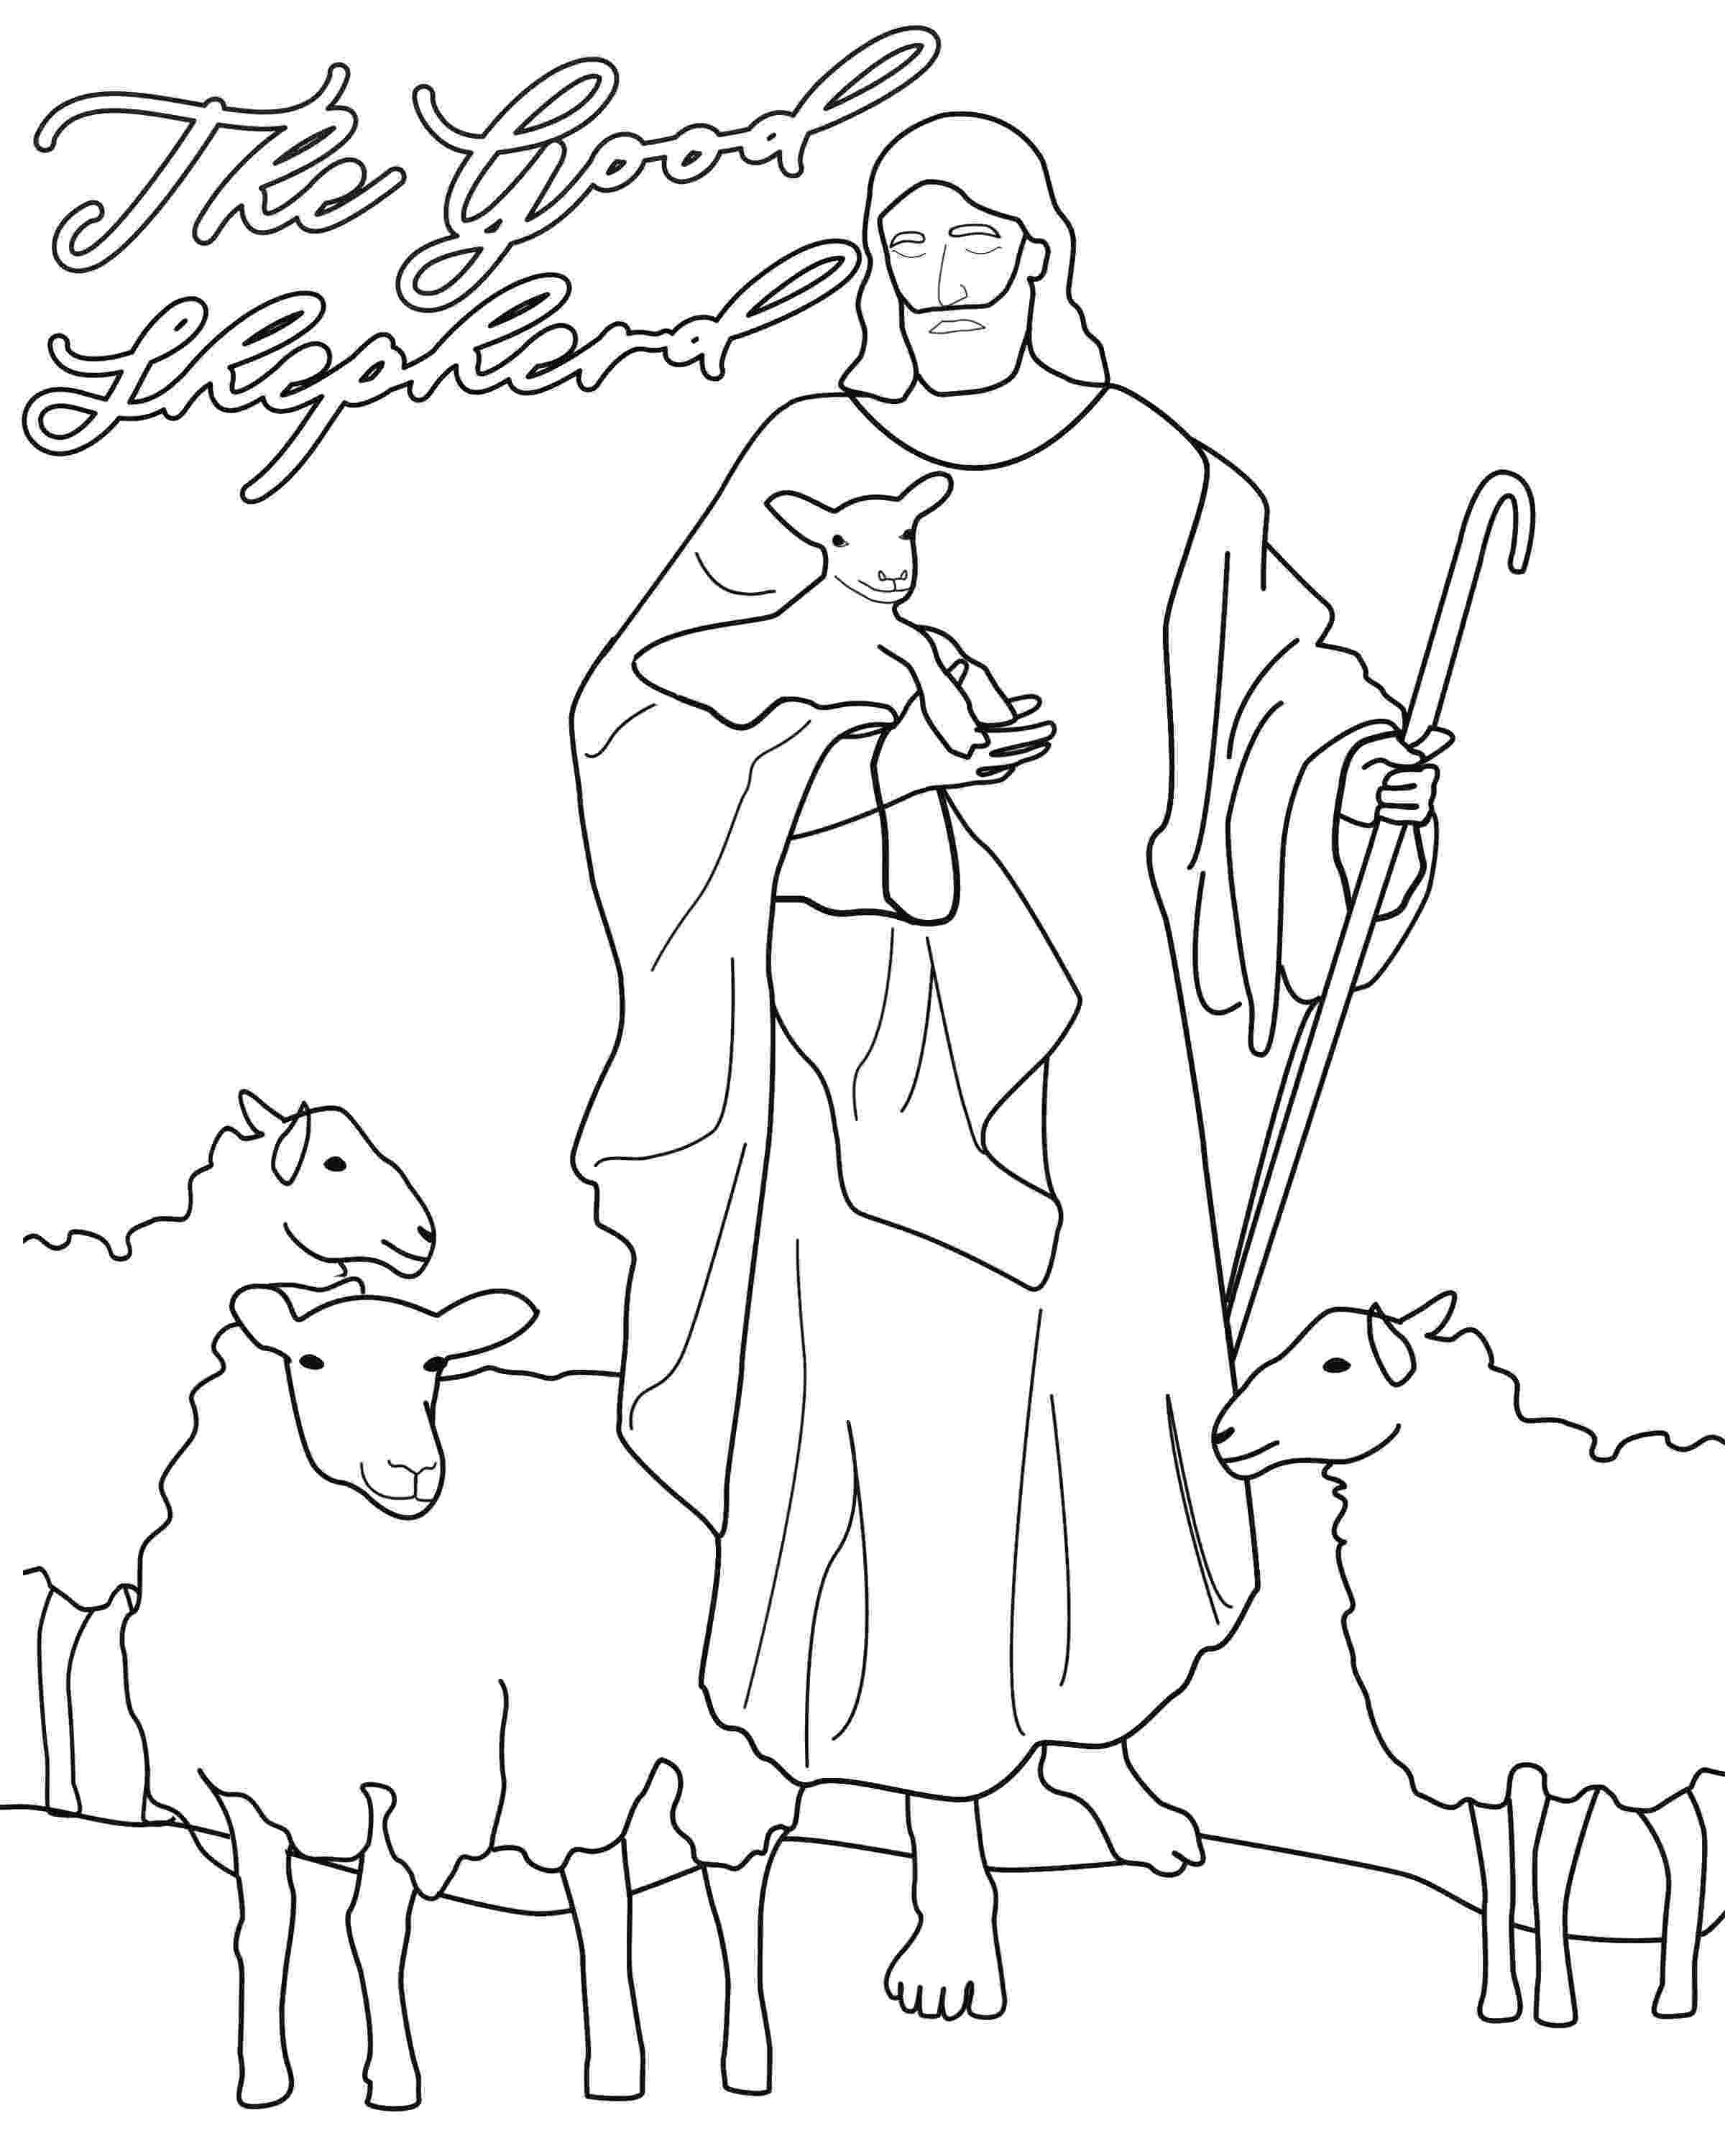 the good shepherd coloring page jesus is the good shepherd coloring page easy print page coloring good shepherd the 